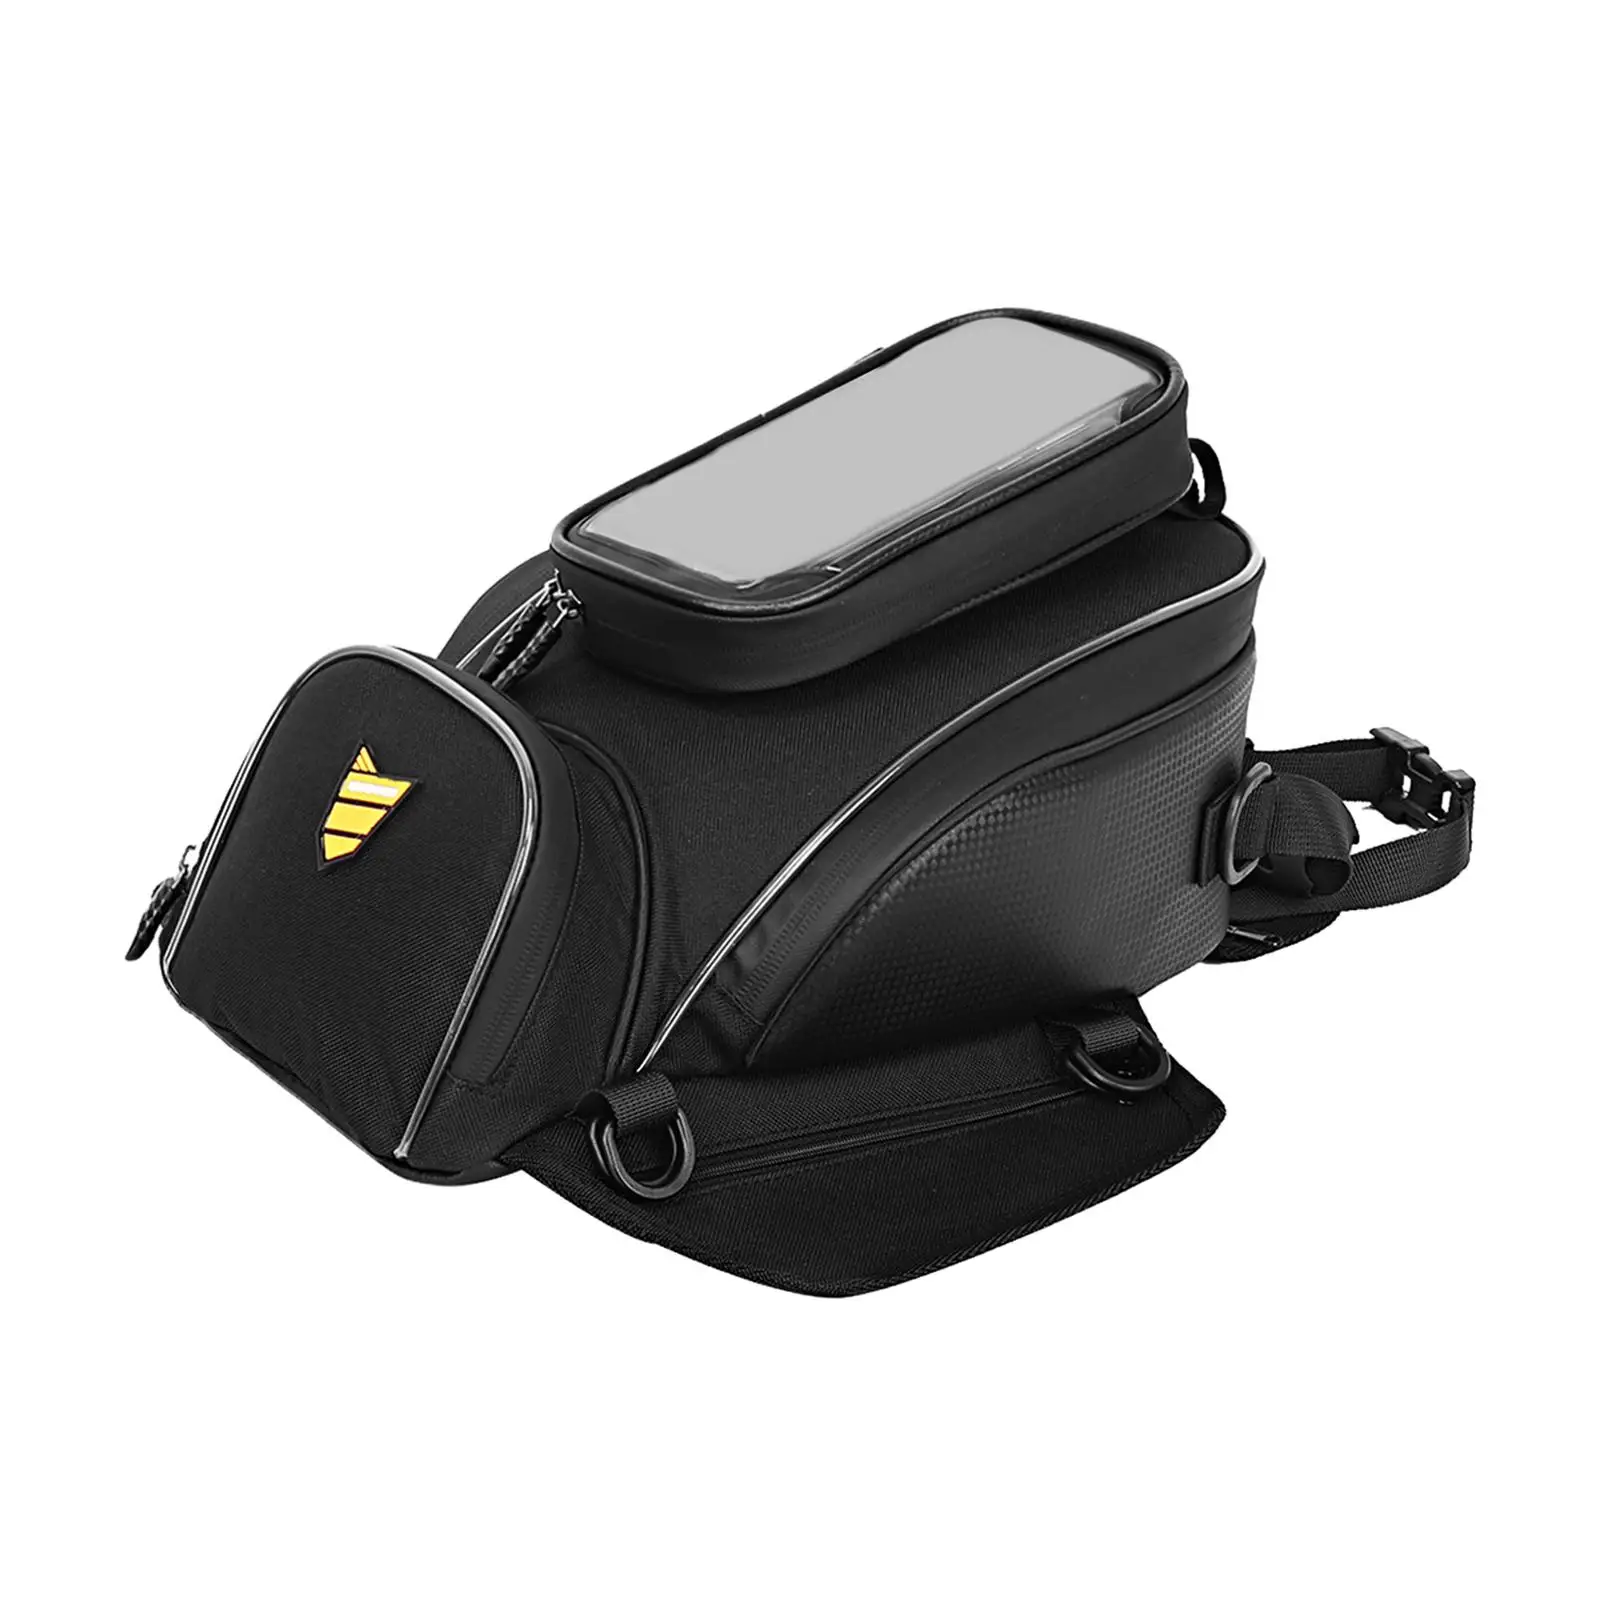 Universal Motorcycle Tank Bag Phone Pocket Touch Screen for Riding Traveling